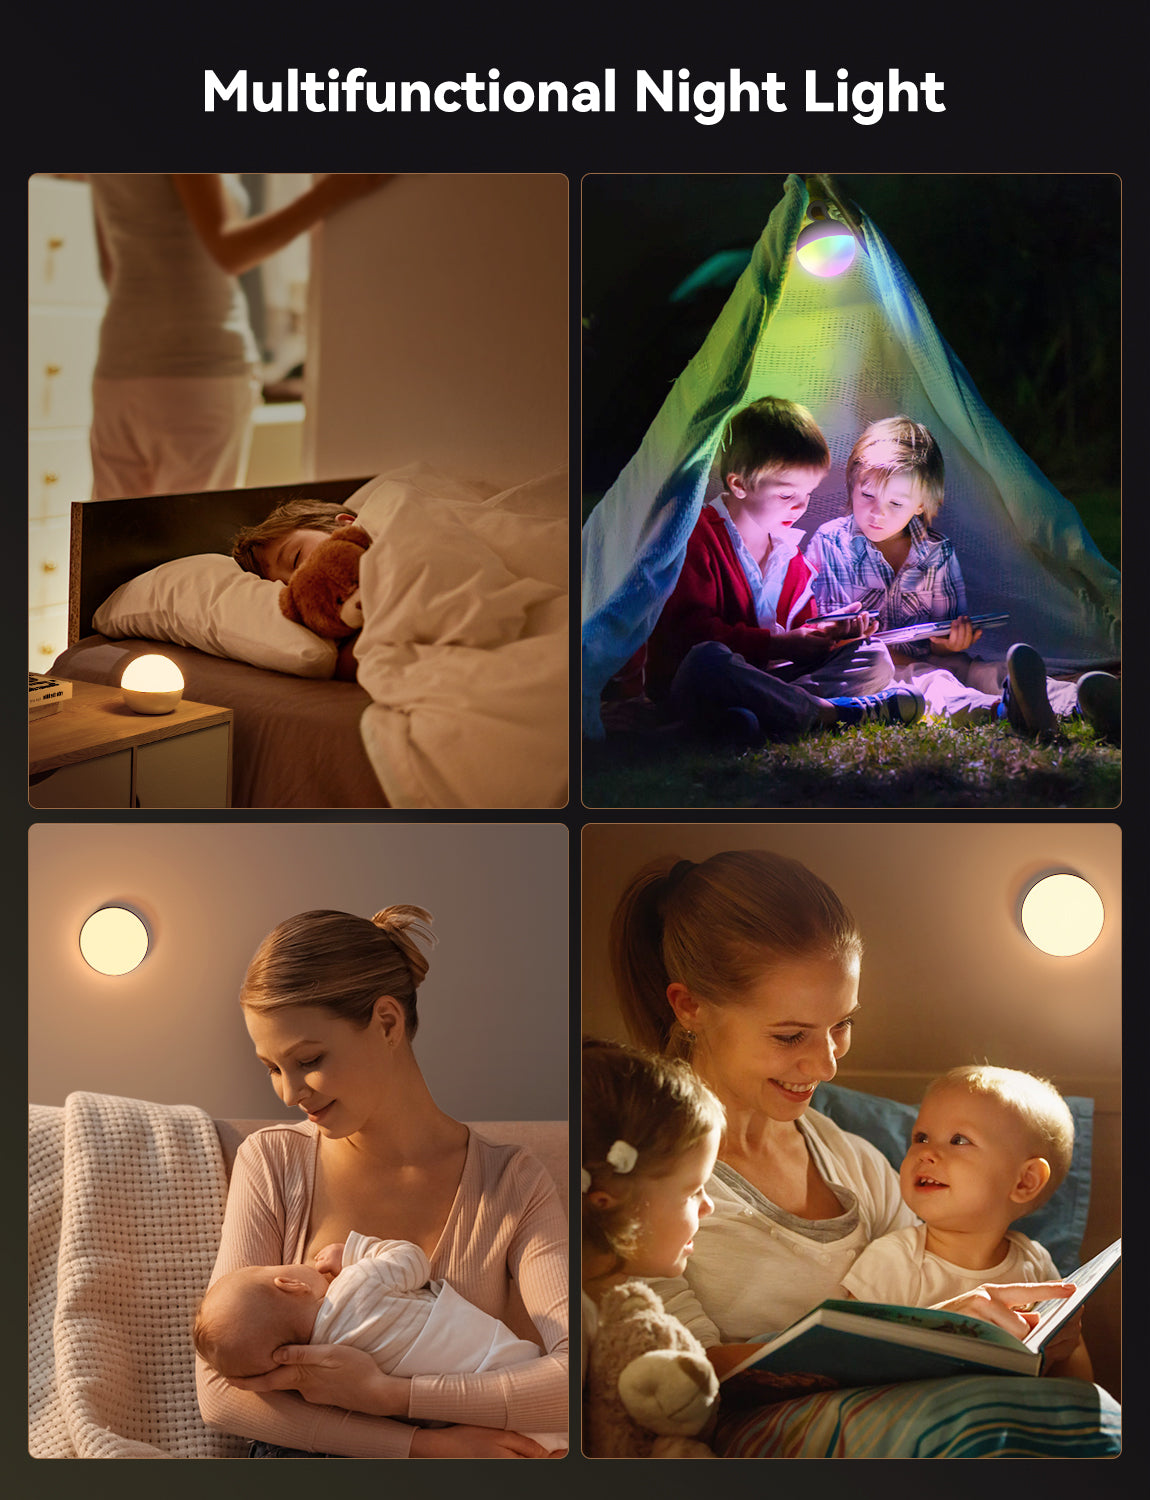 The night light is used in children's rooms and is equipped in children's camping tents.